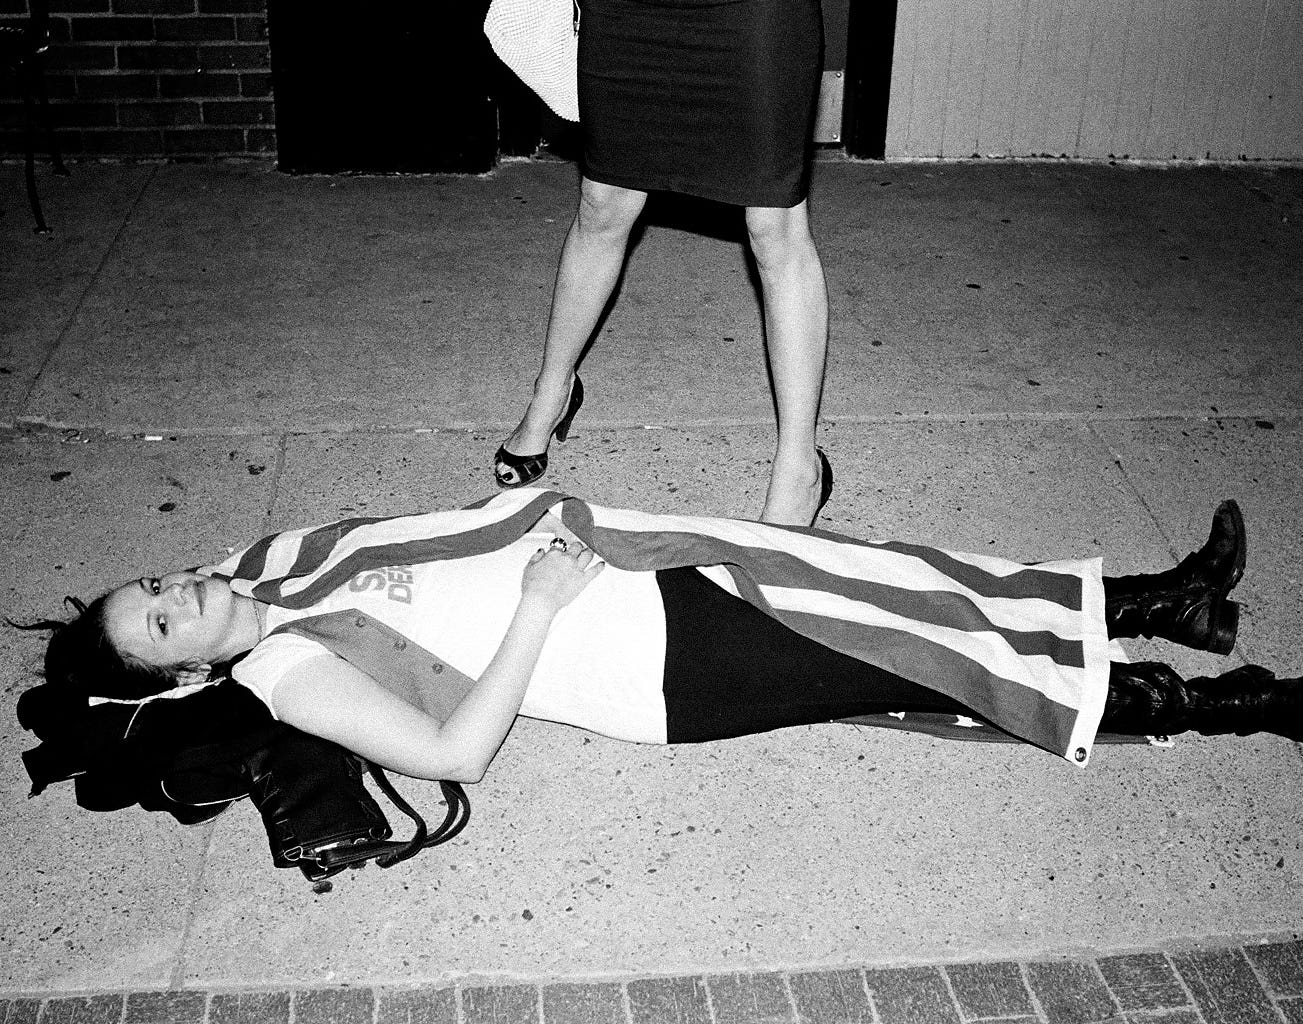 Amber lying on a sidewalk. She looks to camera, smiling. Behind her, there is a woman's legs. The woman is wearing a skirt and high heels. The upper half of her body is out of frame. 